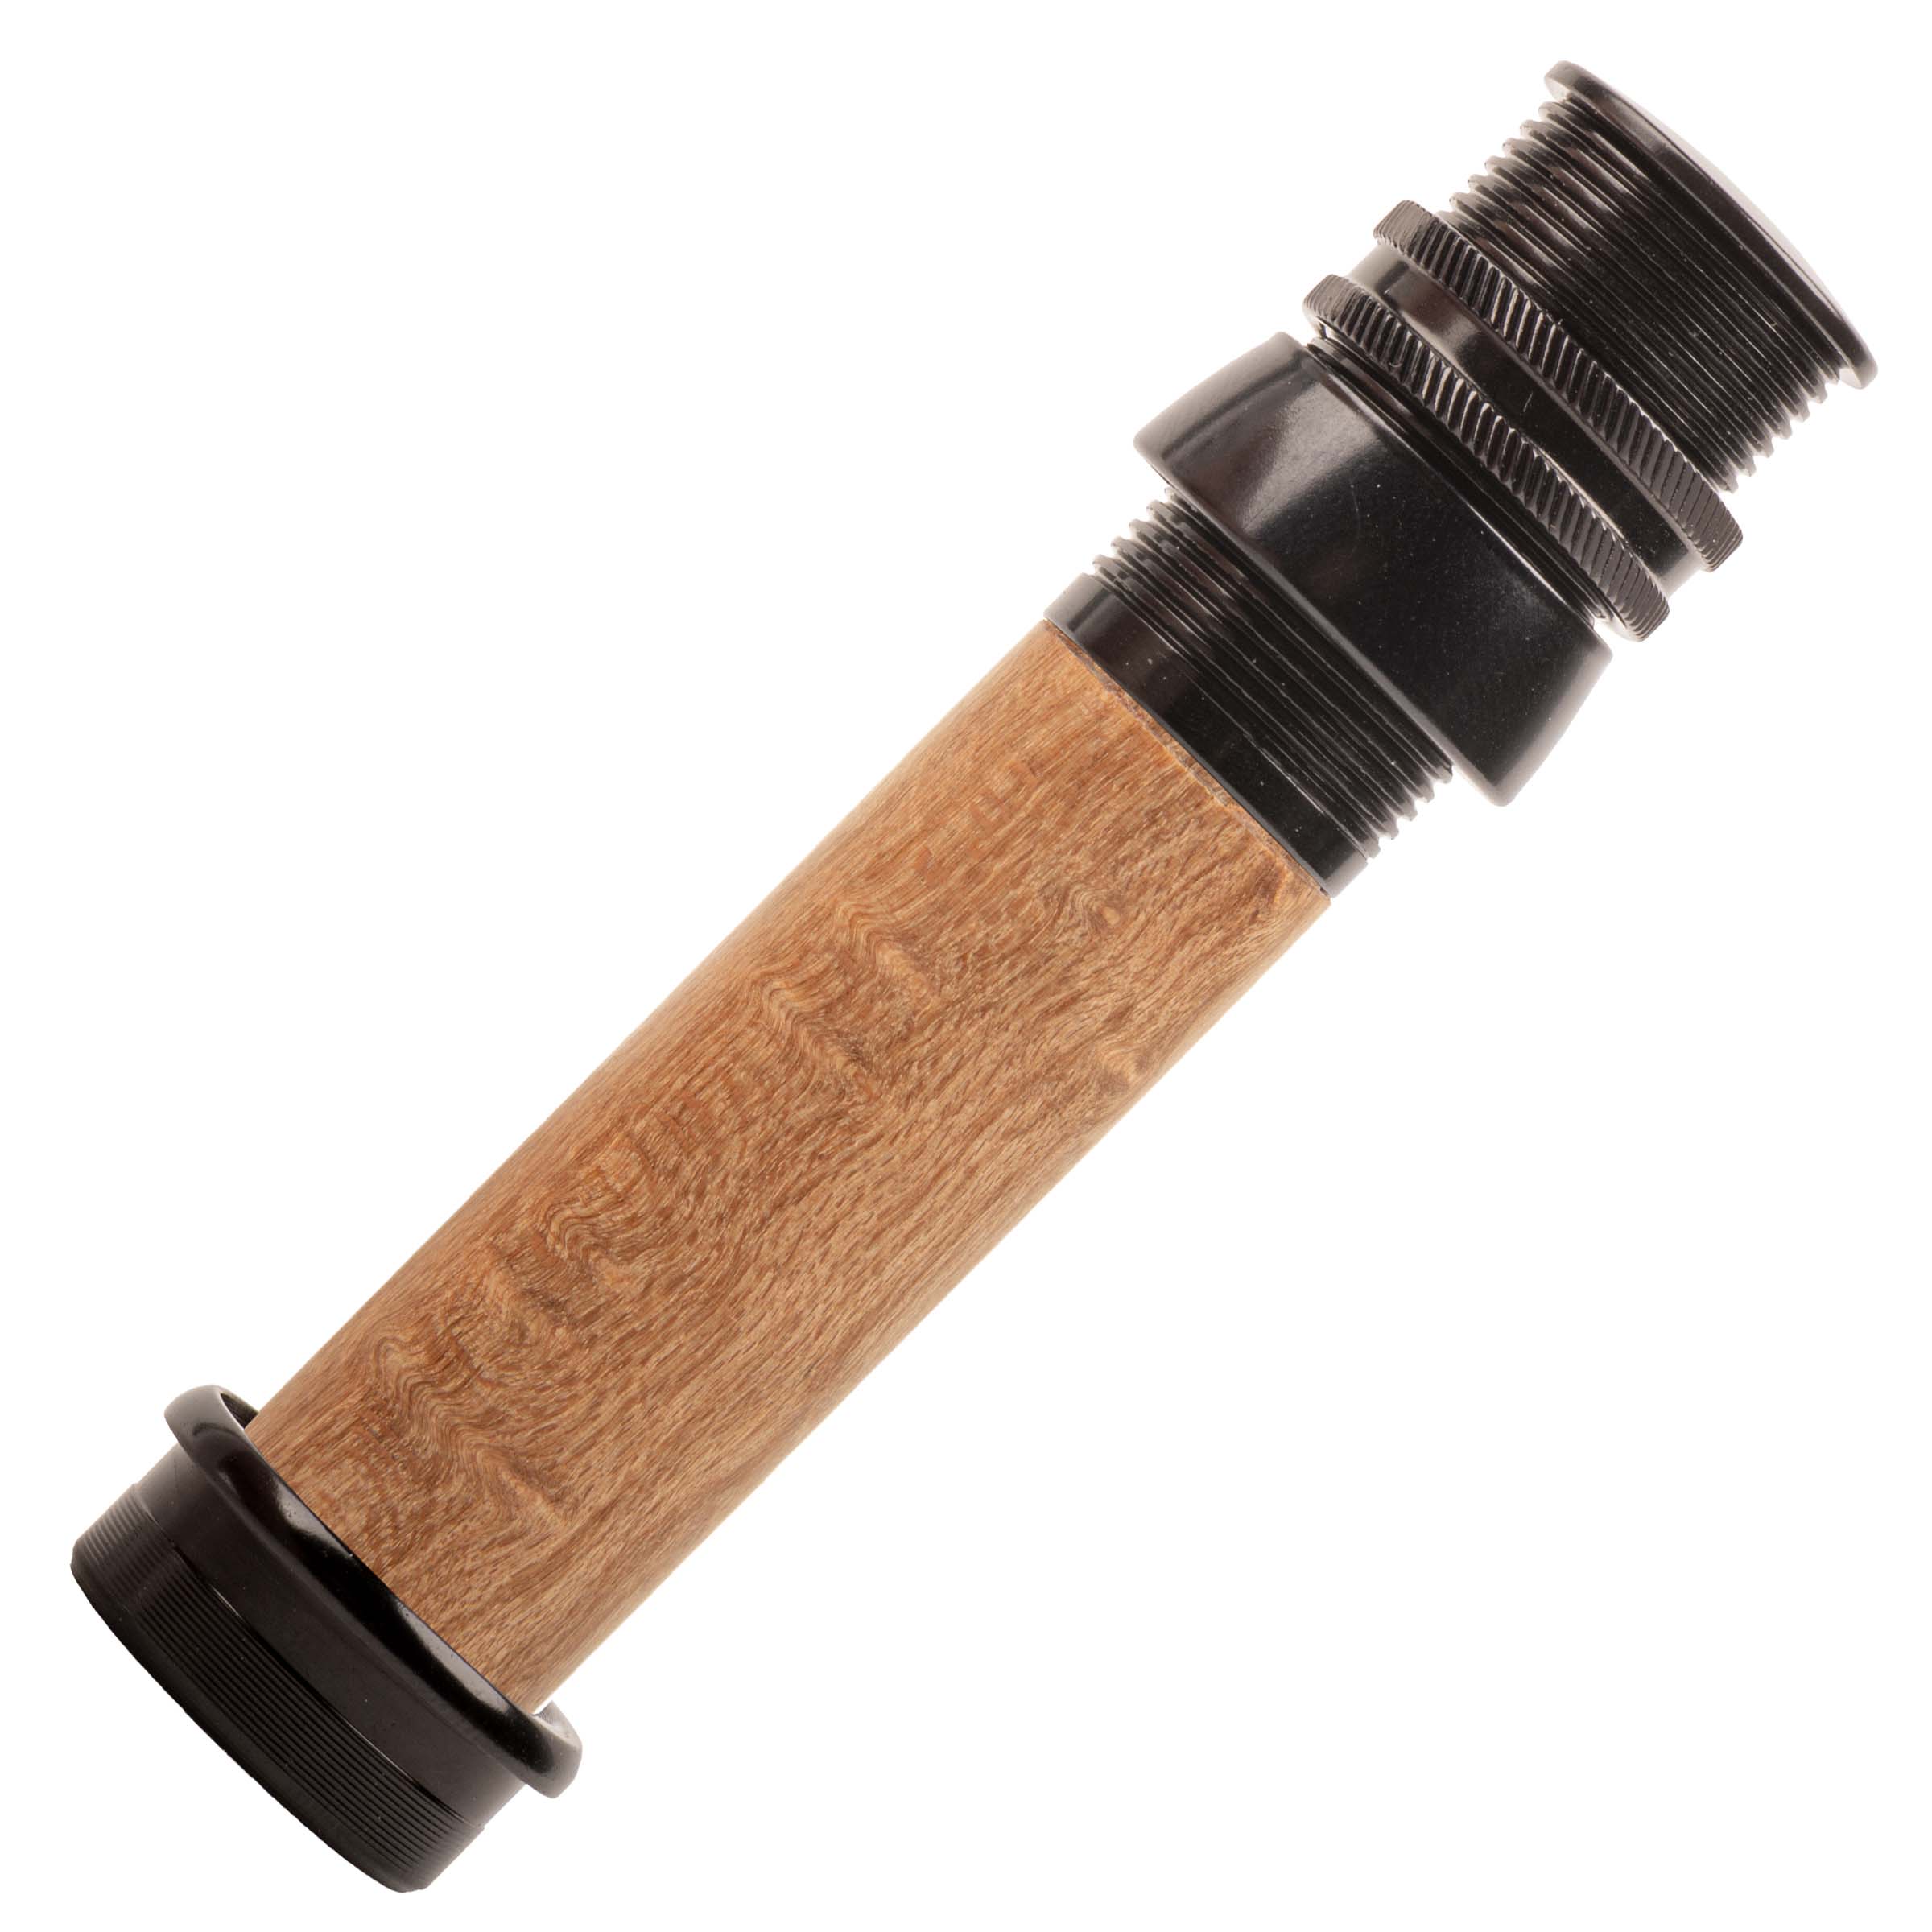 FLY ROD REEL SEAT Curly Maple 9982 Nickel Silver Cap and Ring